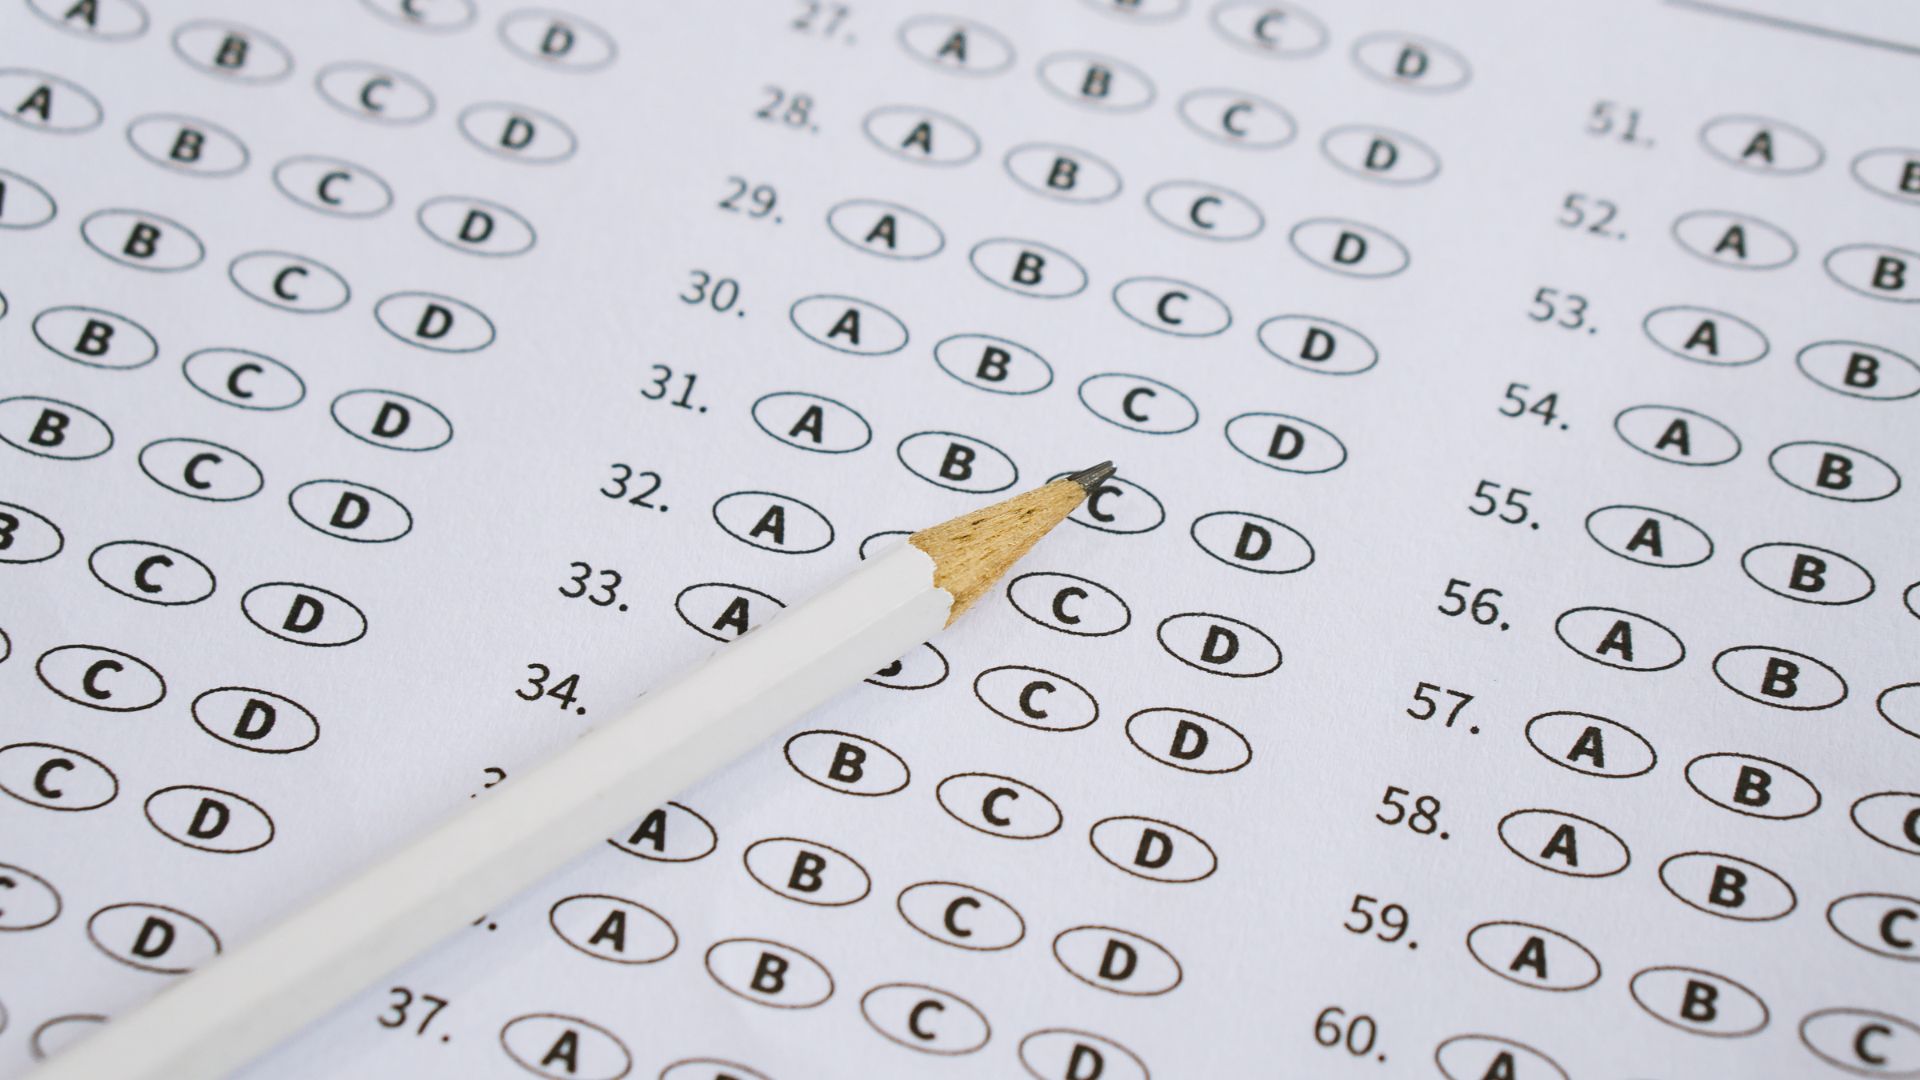 Take just one of the standardized tests